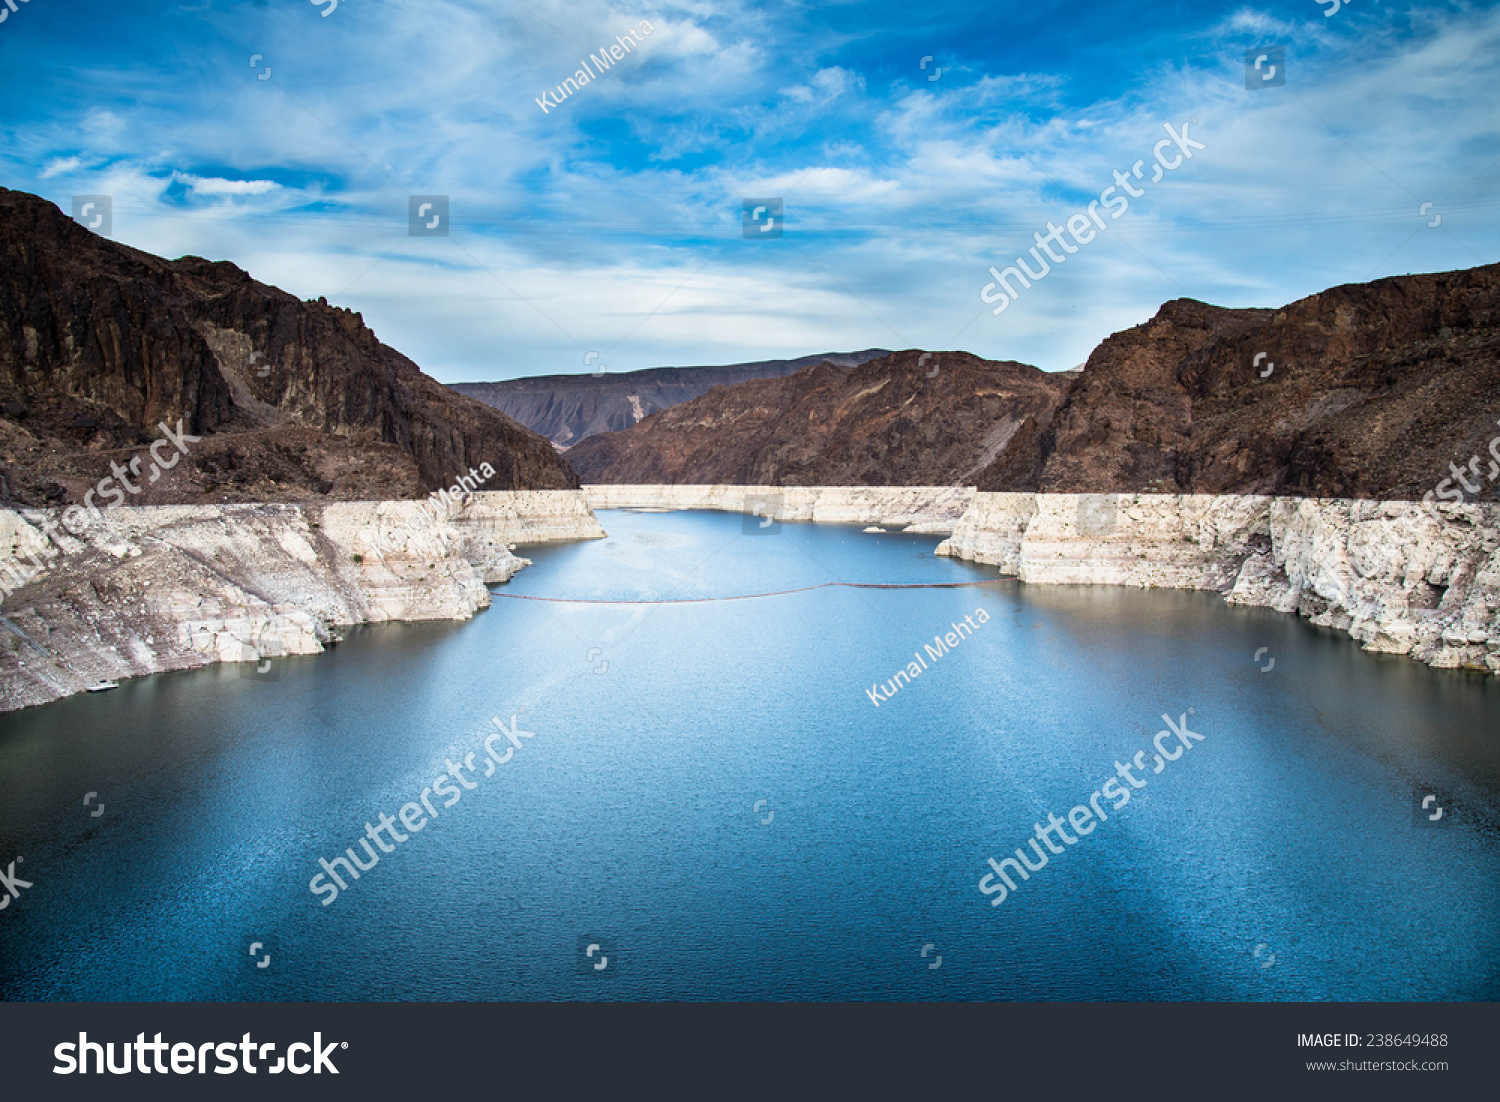 Hoover dam and Lake Mead in Las Vegas area. Hoover Dam is a major tourist attraction on Nevada / Arizona border #238649488